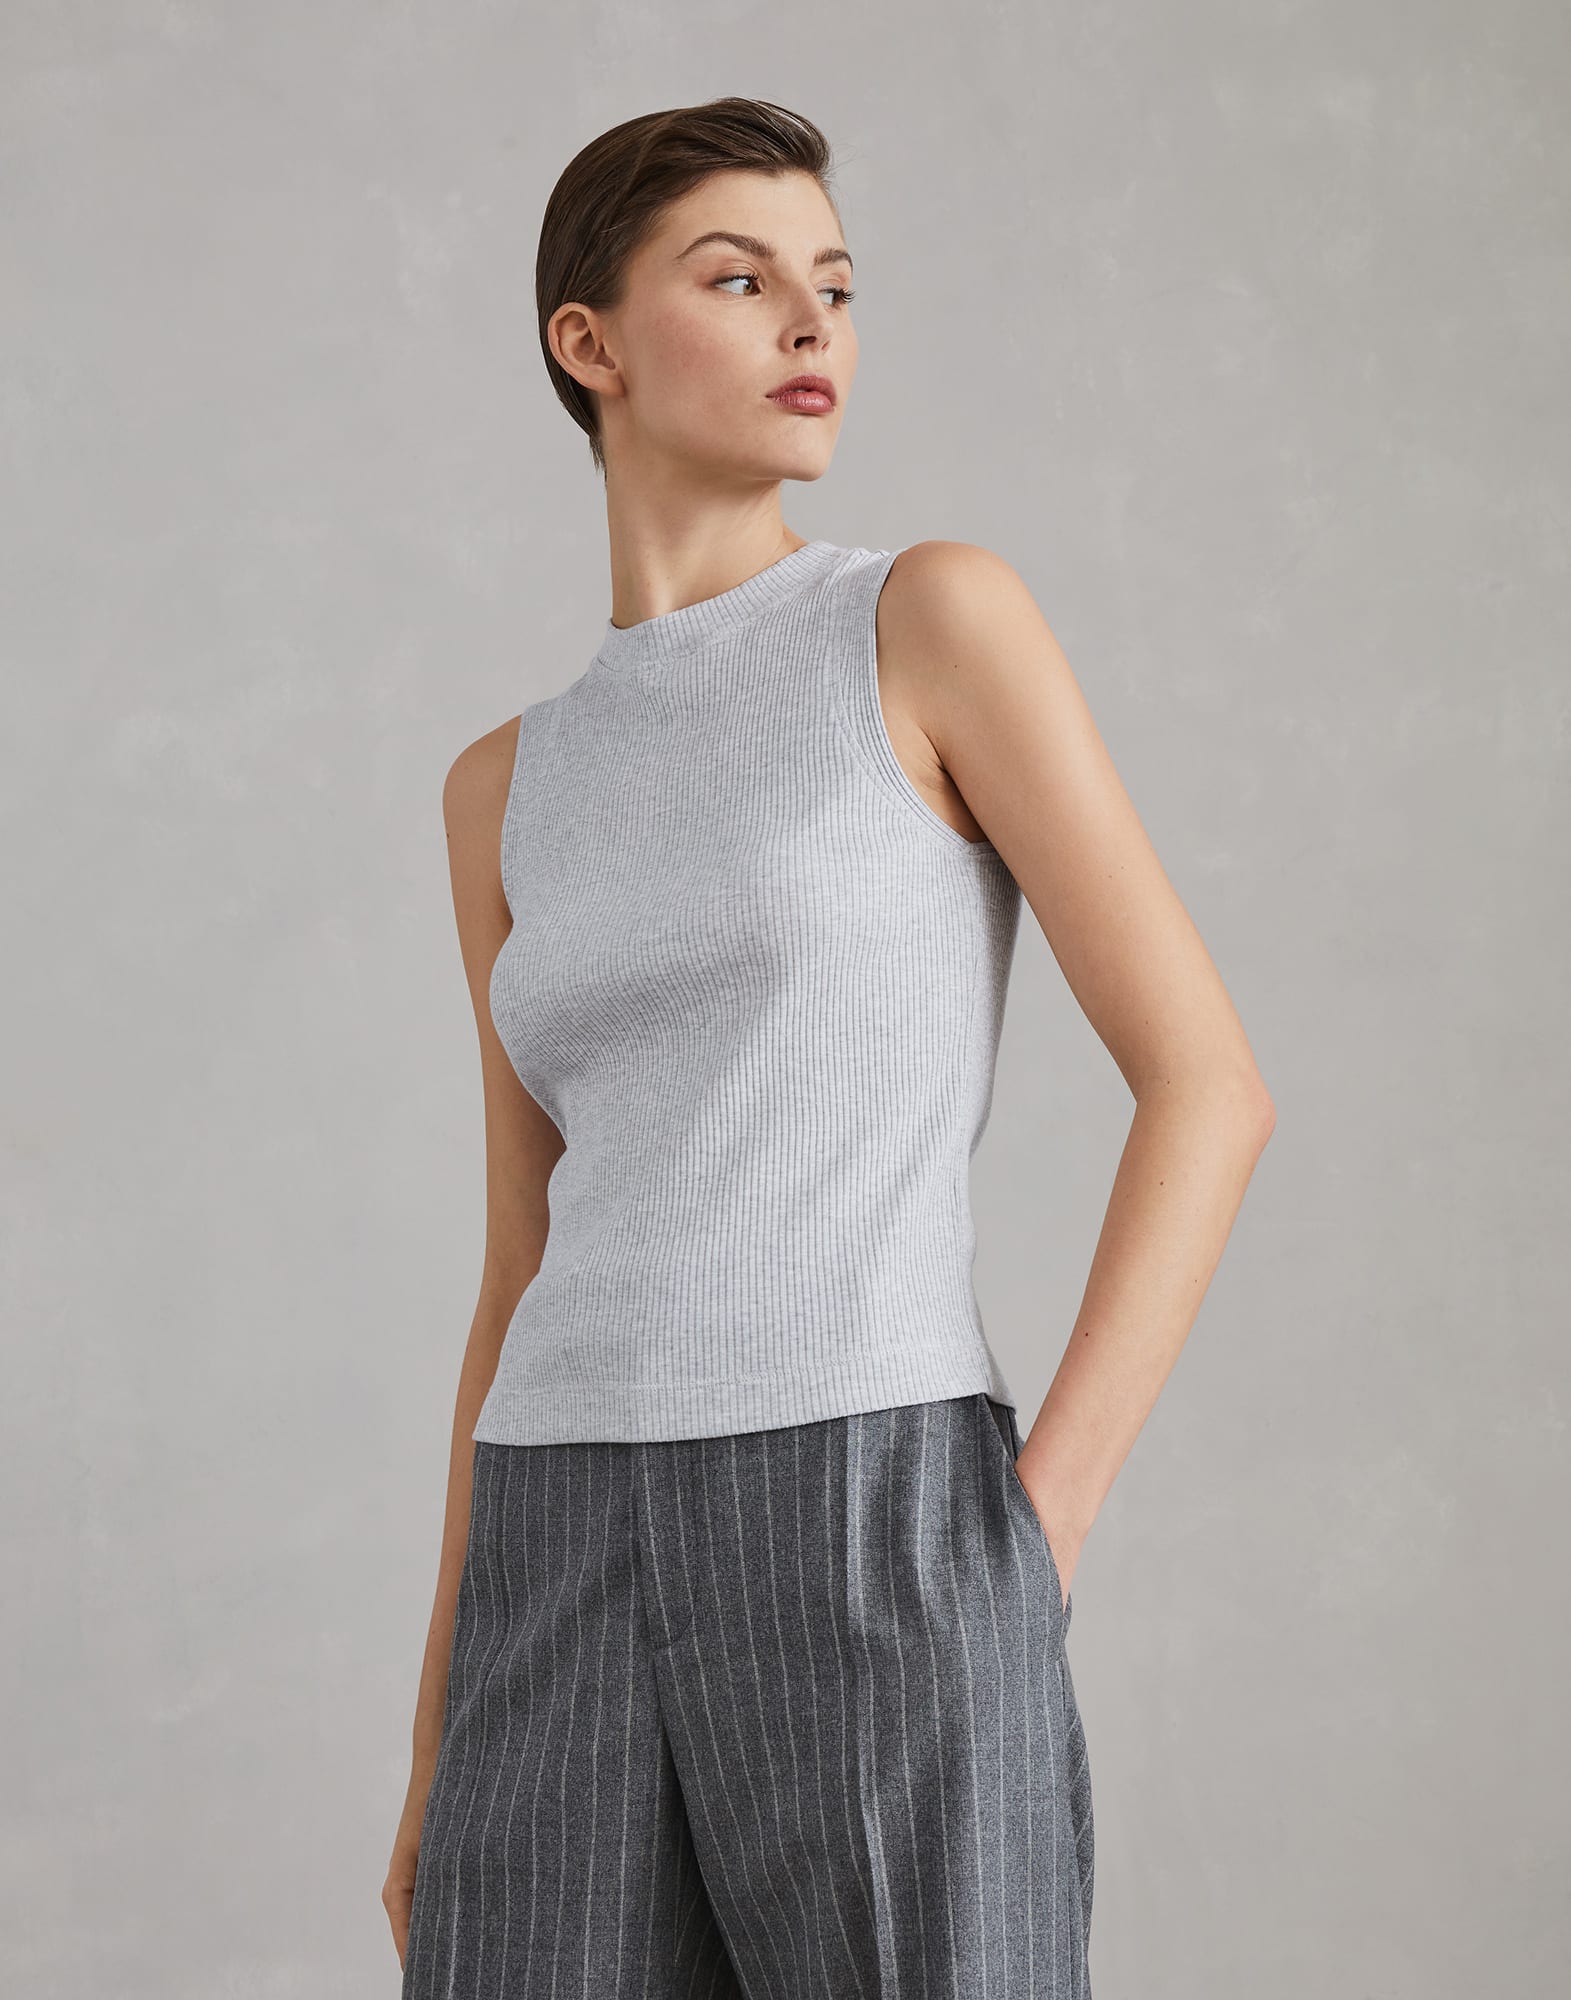 Ribbed jersey top